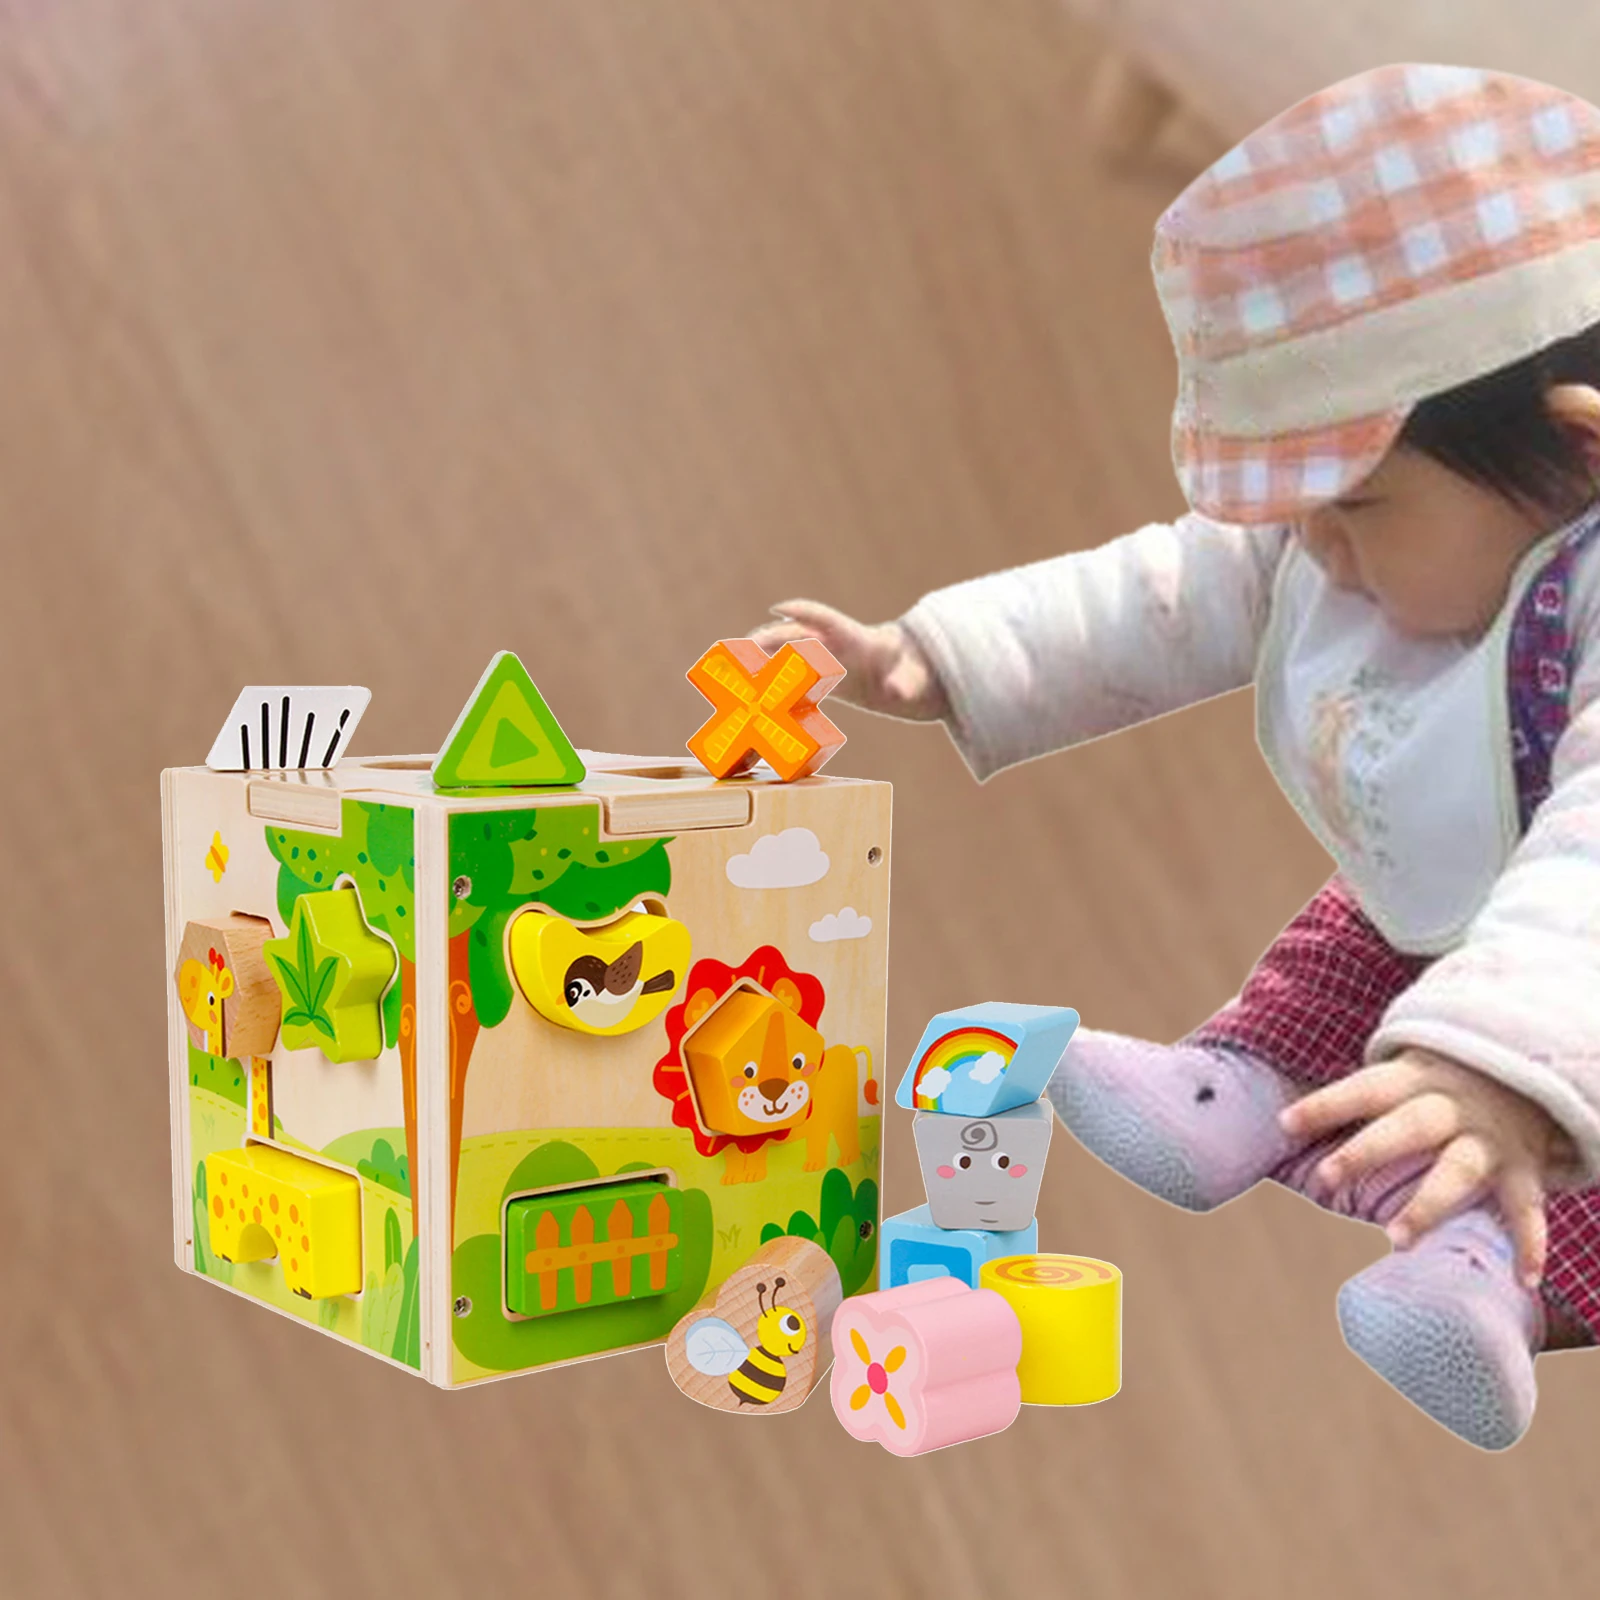 Wood Shape Sorter Toy Geometry Learning Developmental Colorful Toddlers Baby